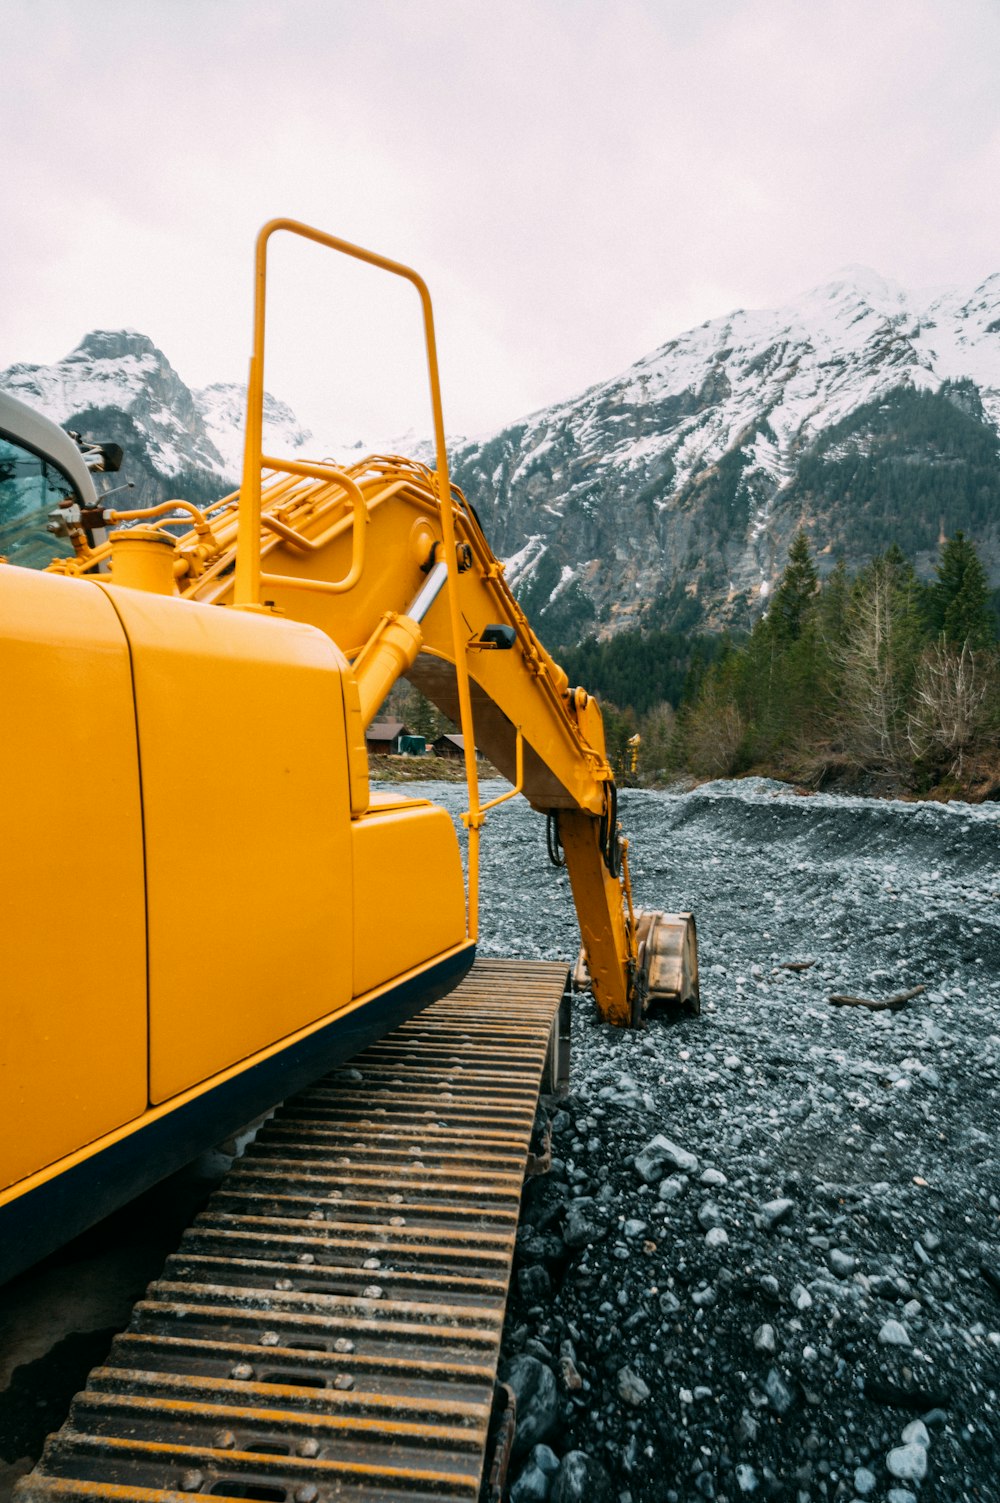 yellow and black heavy equipment on rocky ground